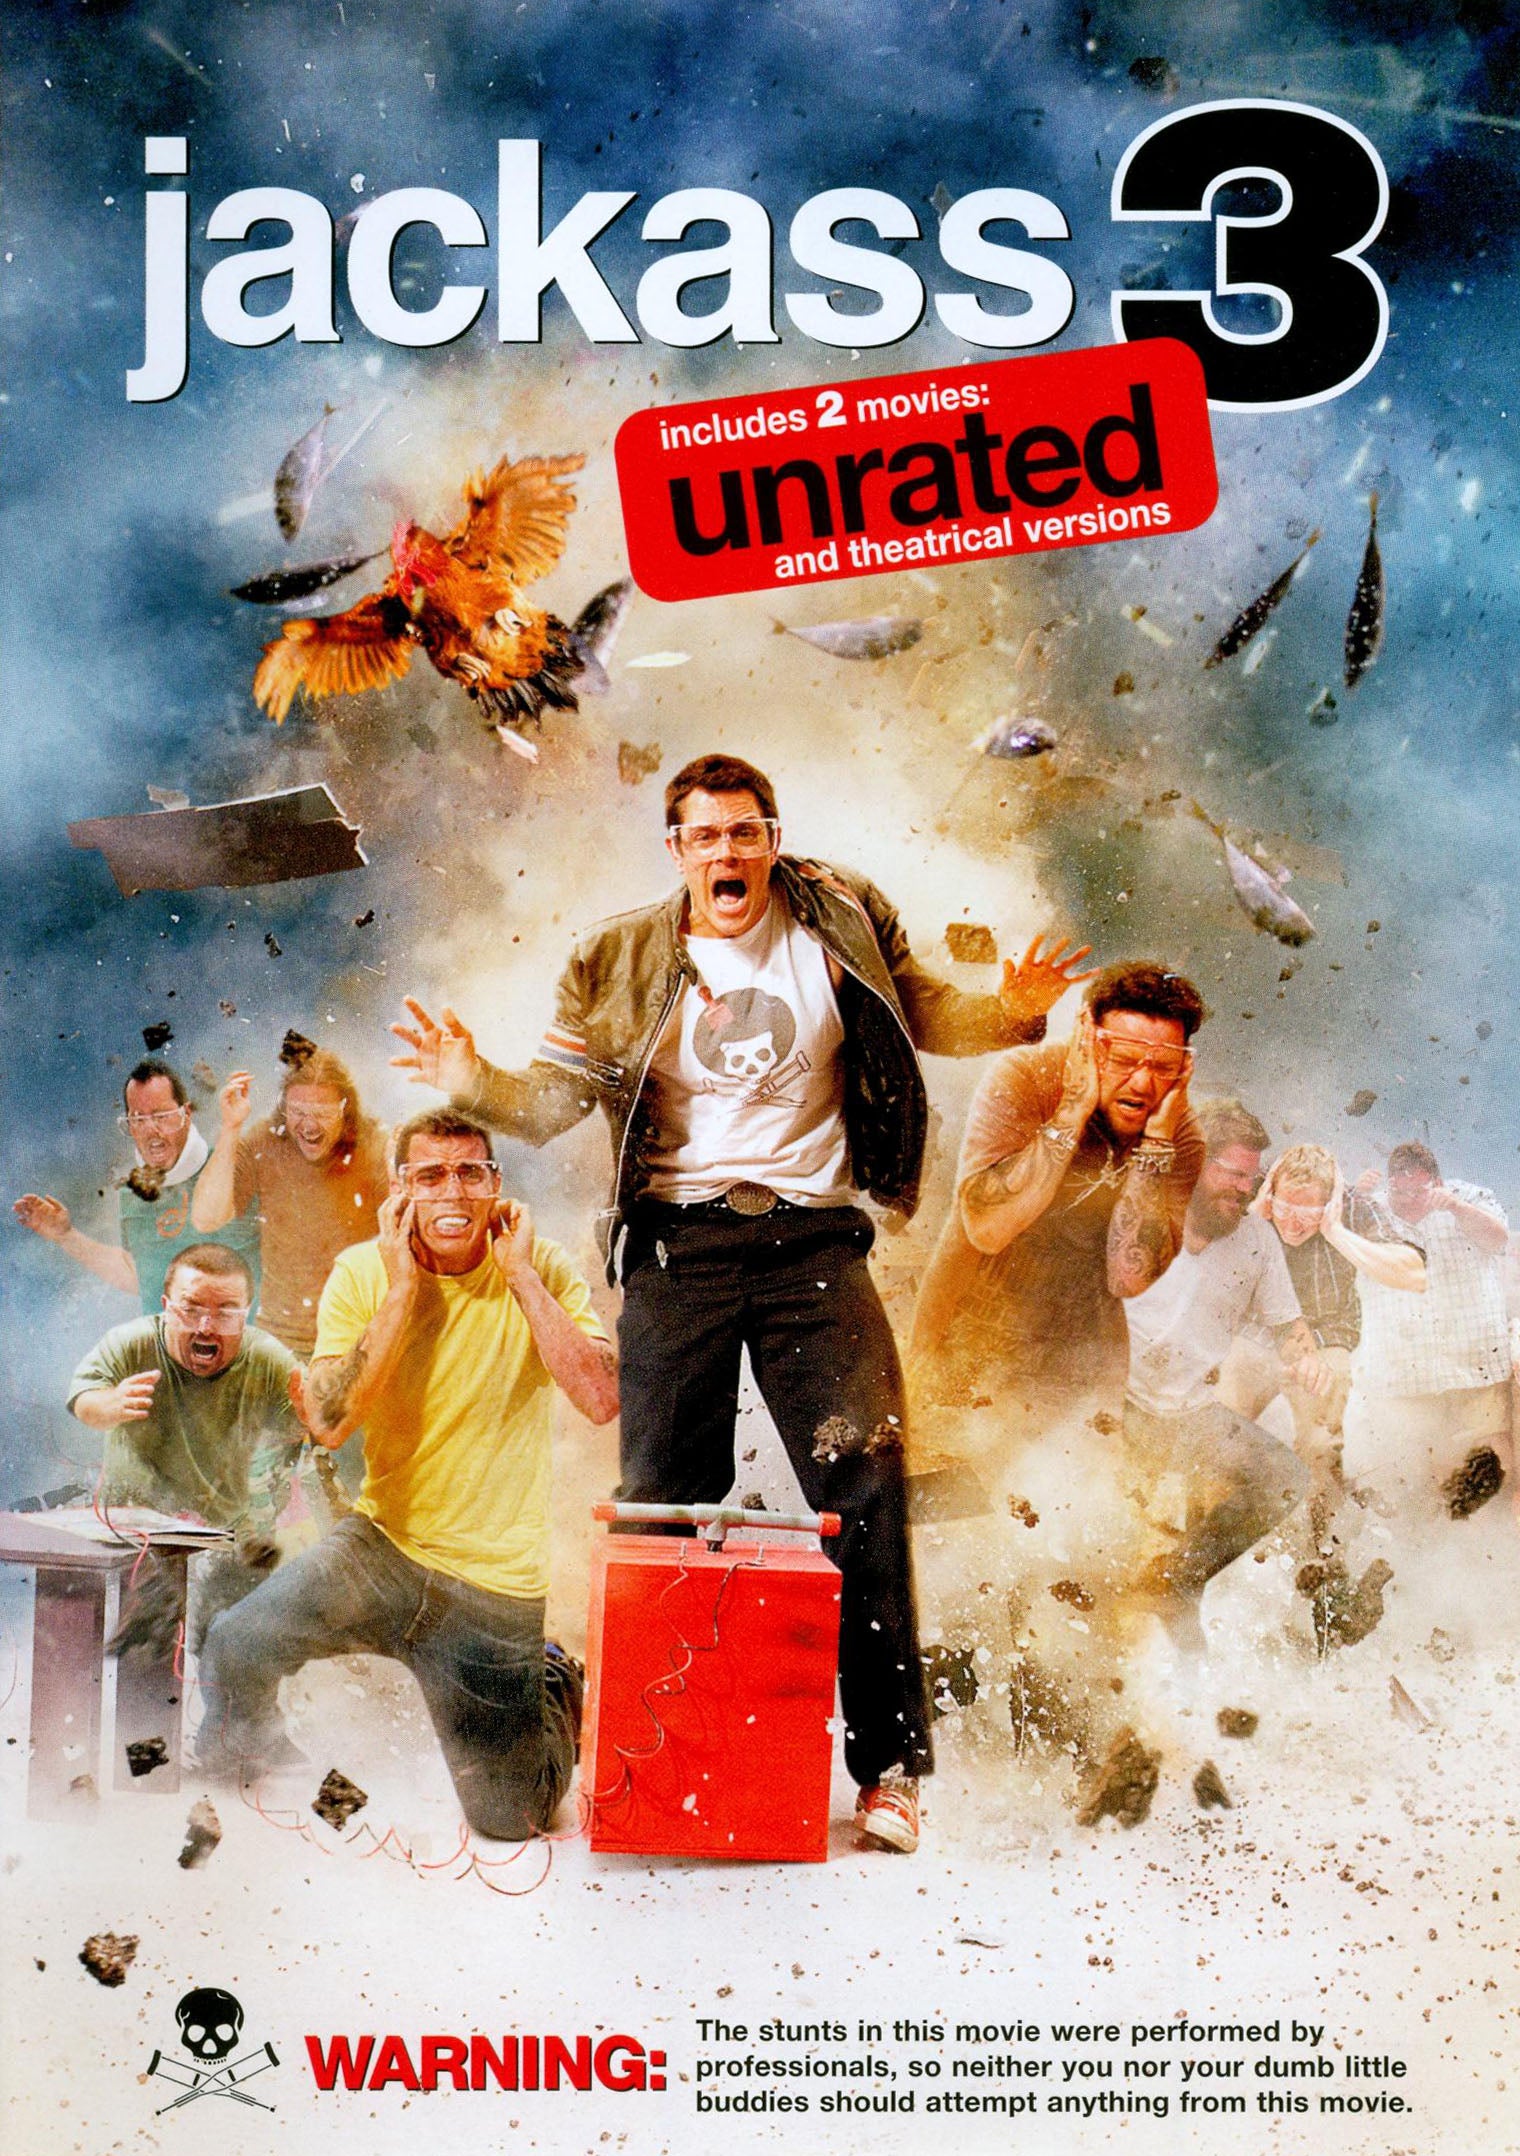 Jackass 3 [Rated/Unrated] cover art